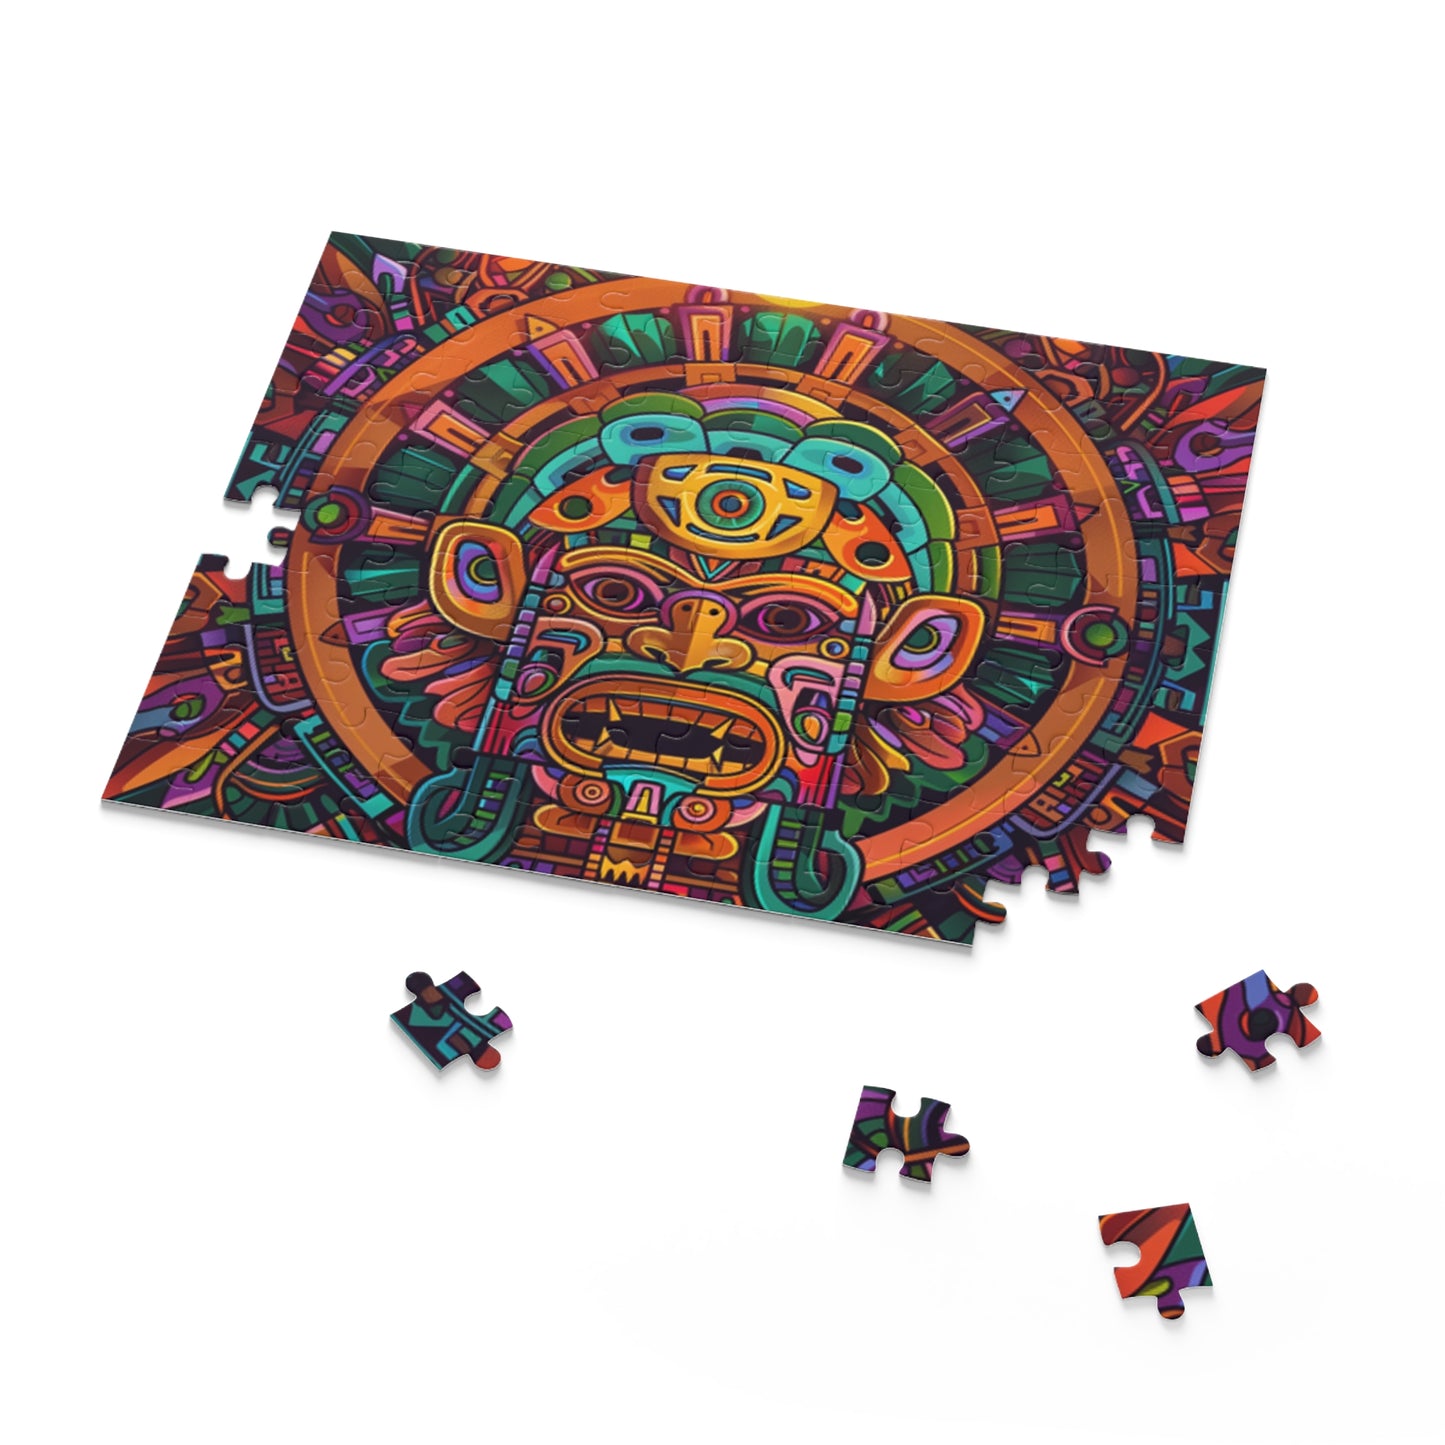 Mexican Men Art Retro Jigsaw Puzzle Adult Birthday Business Jigsaw Puzzle Gift for Him Funny Humorous Indoor Outdoor Game Gift For Her Online-7